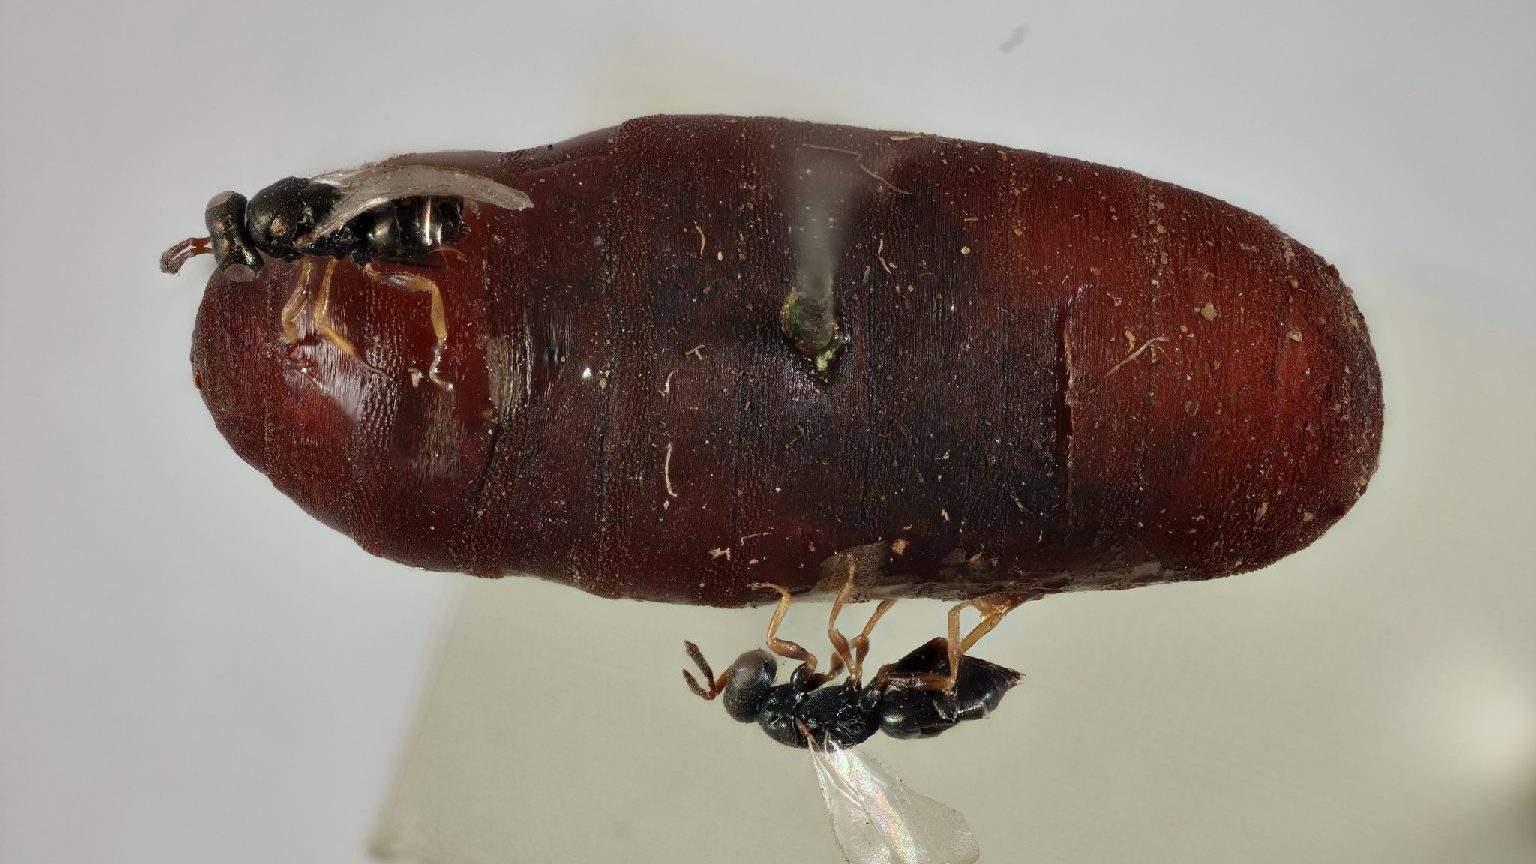 Like a foreign movie: Parasitic wasps evolve inside hosts